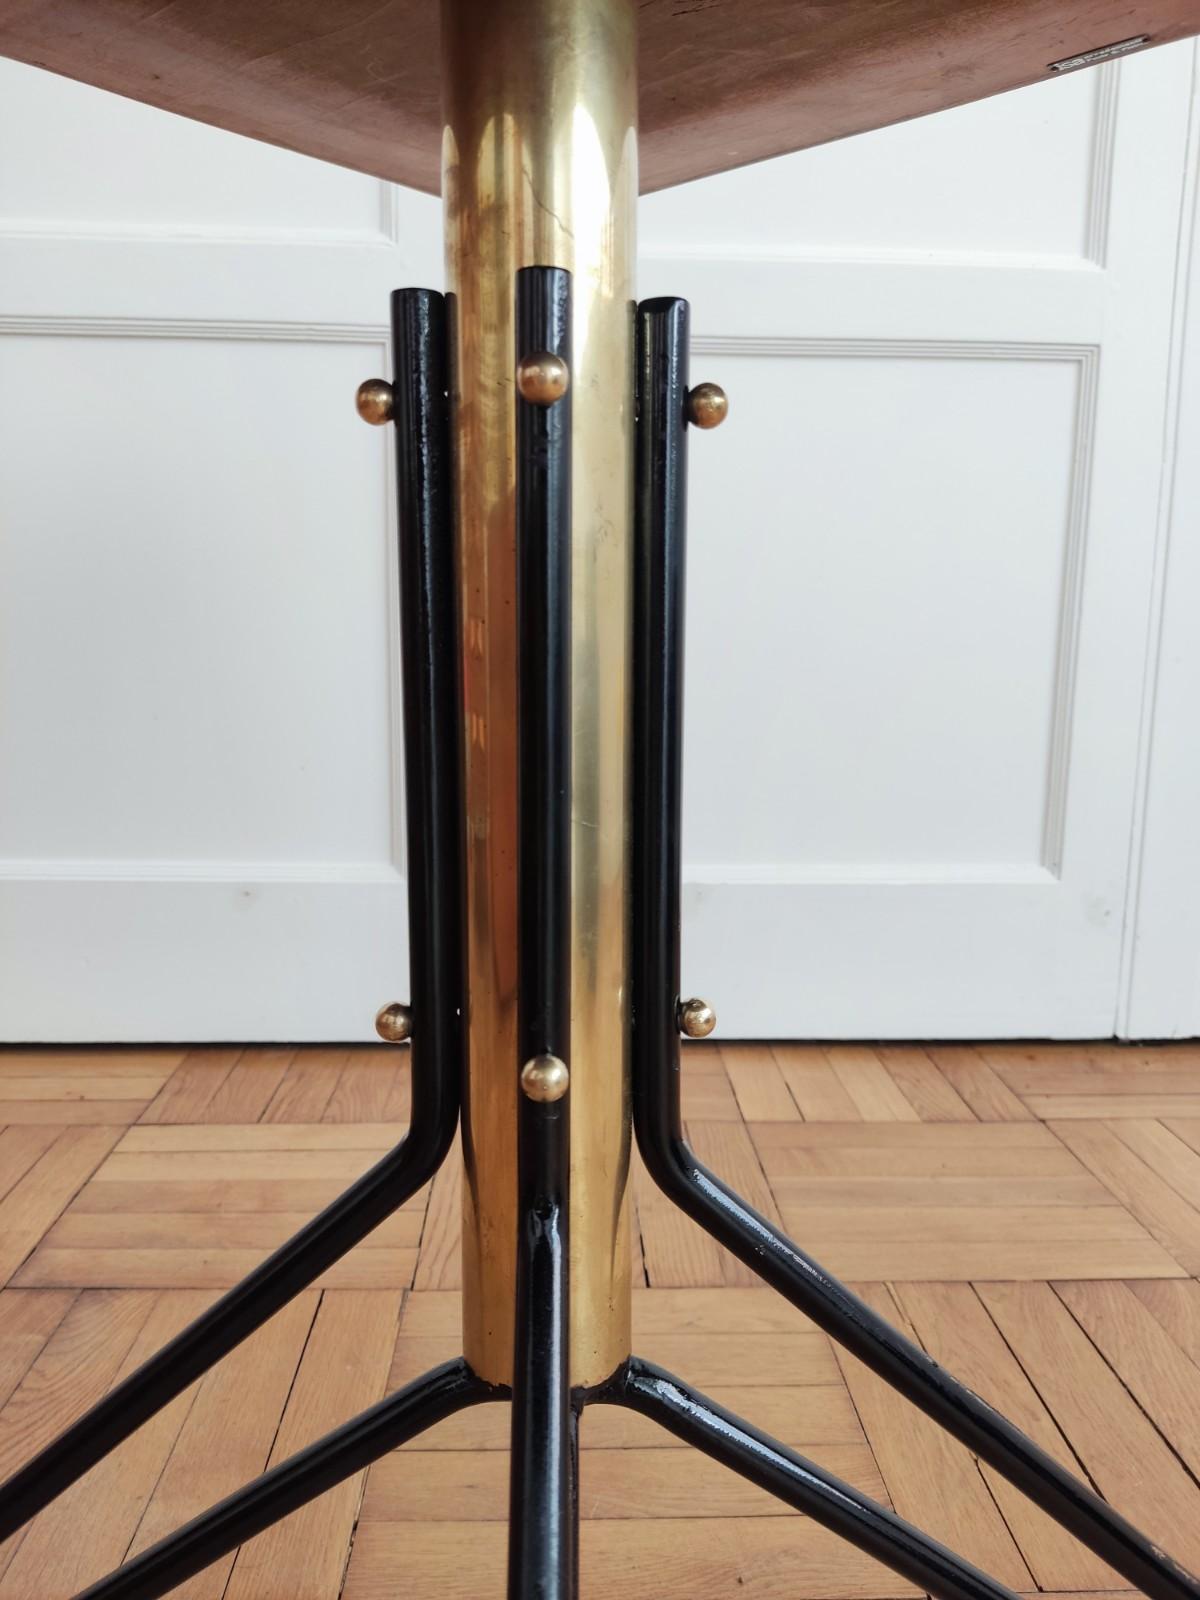 Side table - Carlo Ratti inspiration
Italian designer from the 1960s.
The play of materials and colors: wood, brass, metal as well as pure lines give a lot of elegance and finesse to this rare table.
Age-related traces of use

